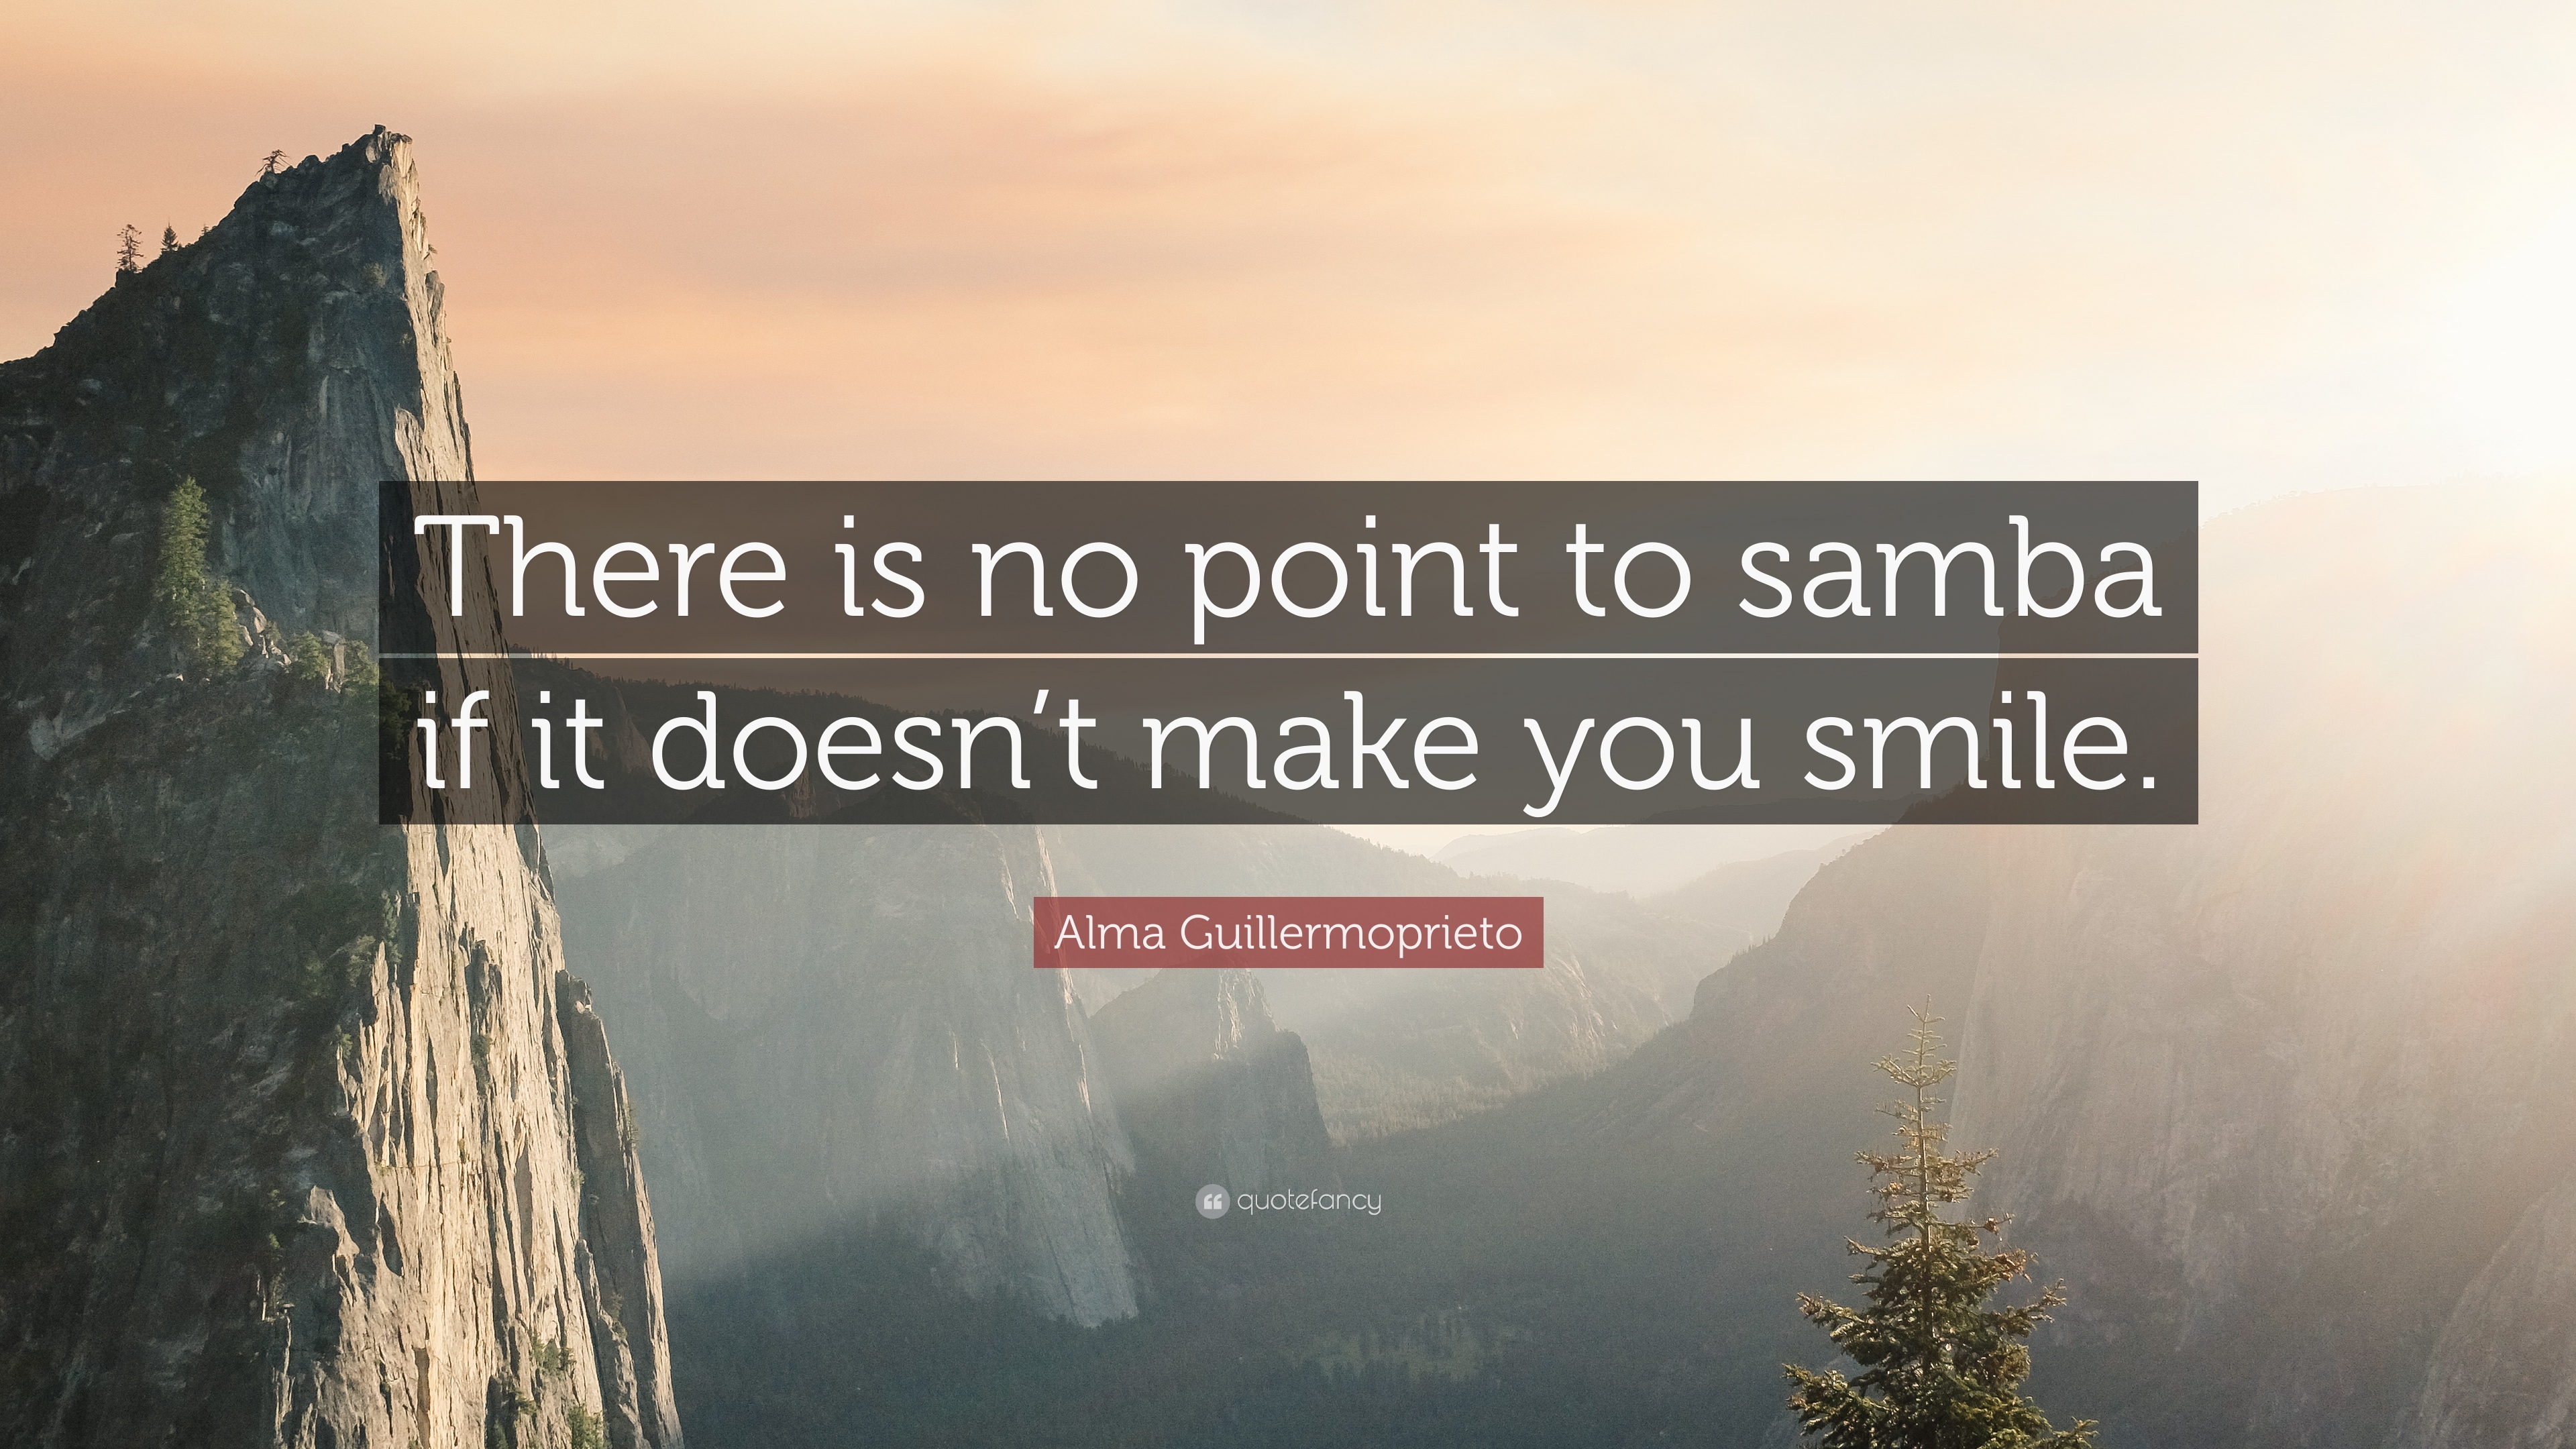 Alma Guillermoprieto Quote: “There is no point to samba if it doesn